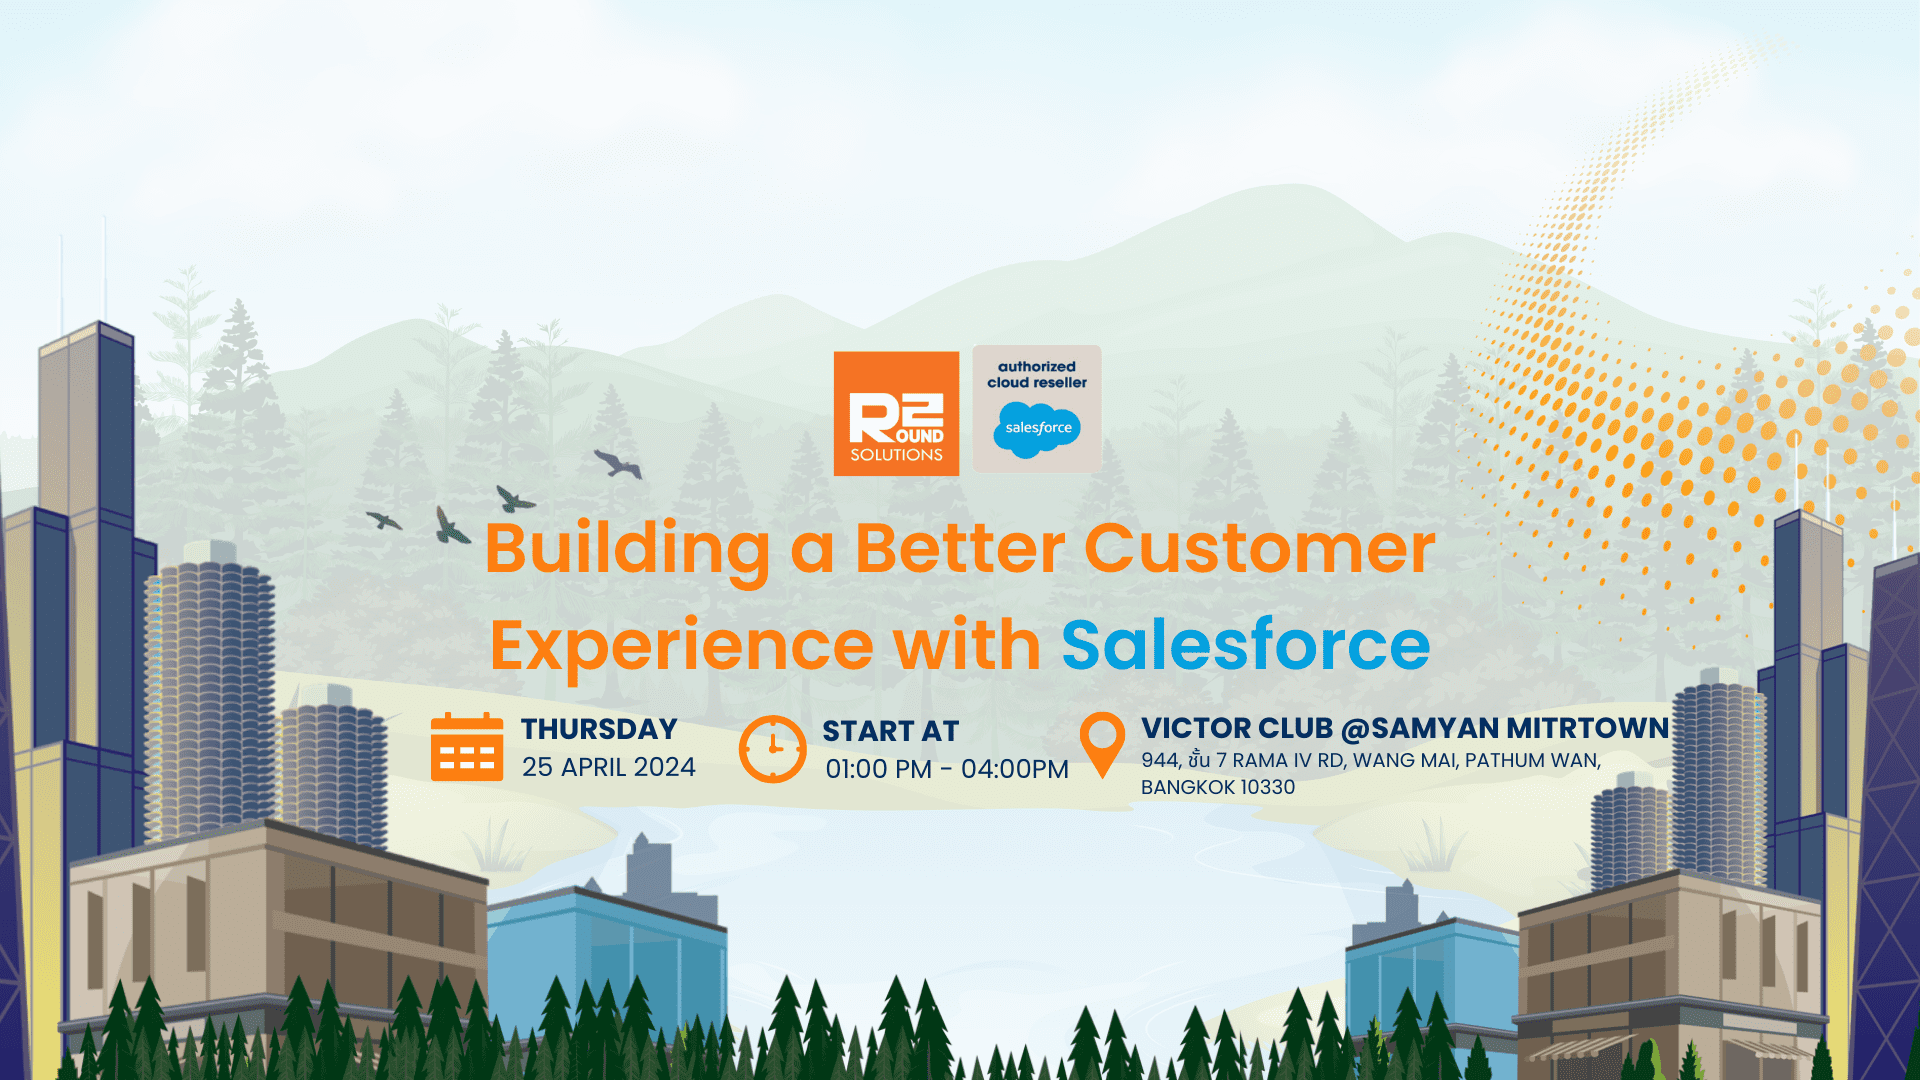 EVENT: Building a Better Customer Experience with Salesforce